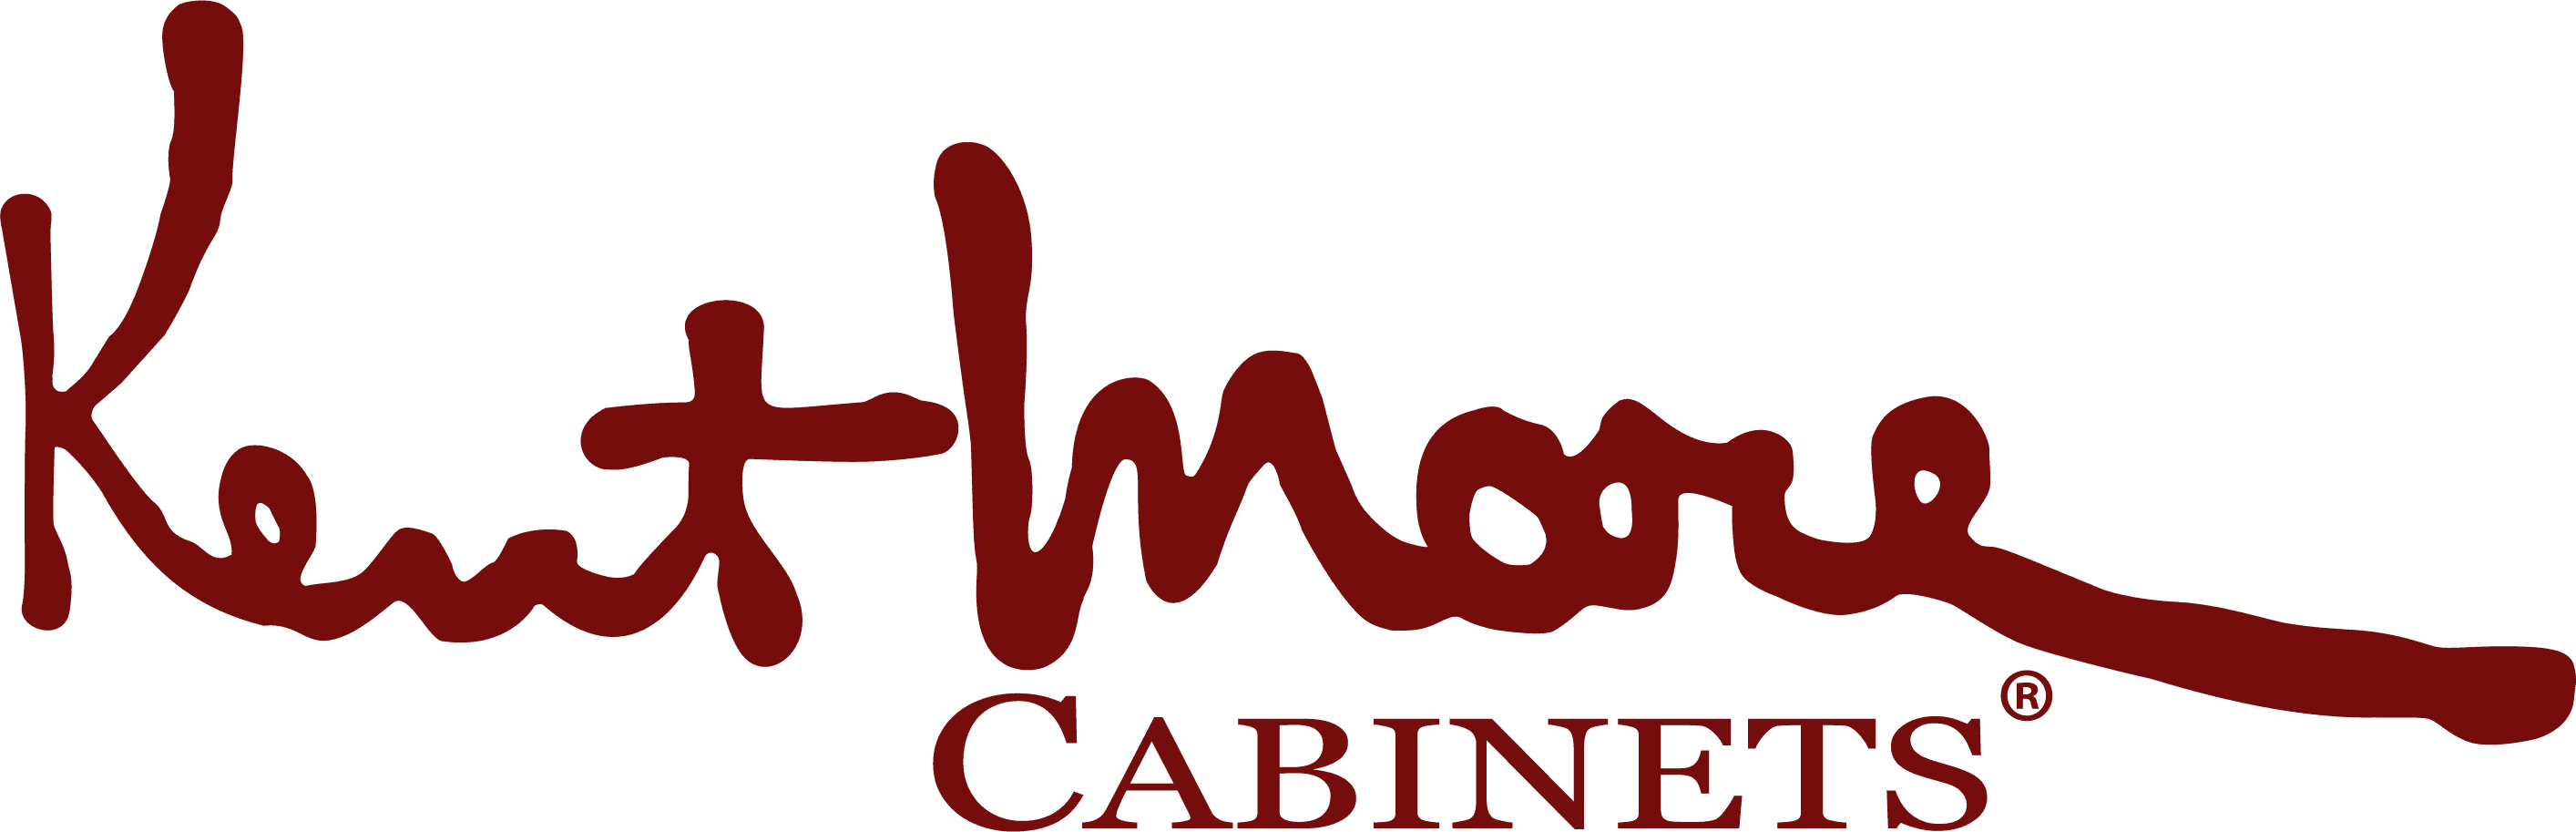 Kent Moore Cabinets